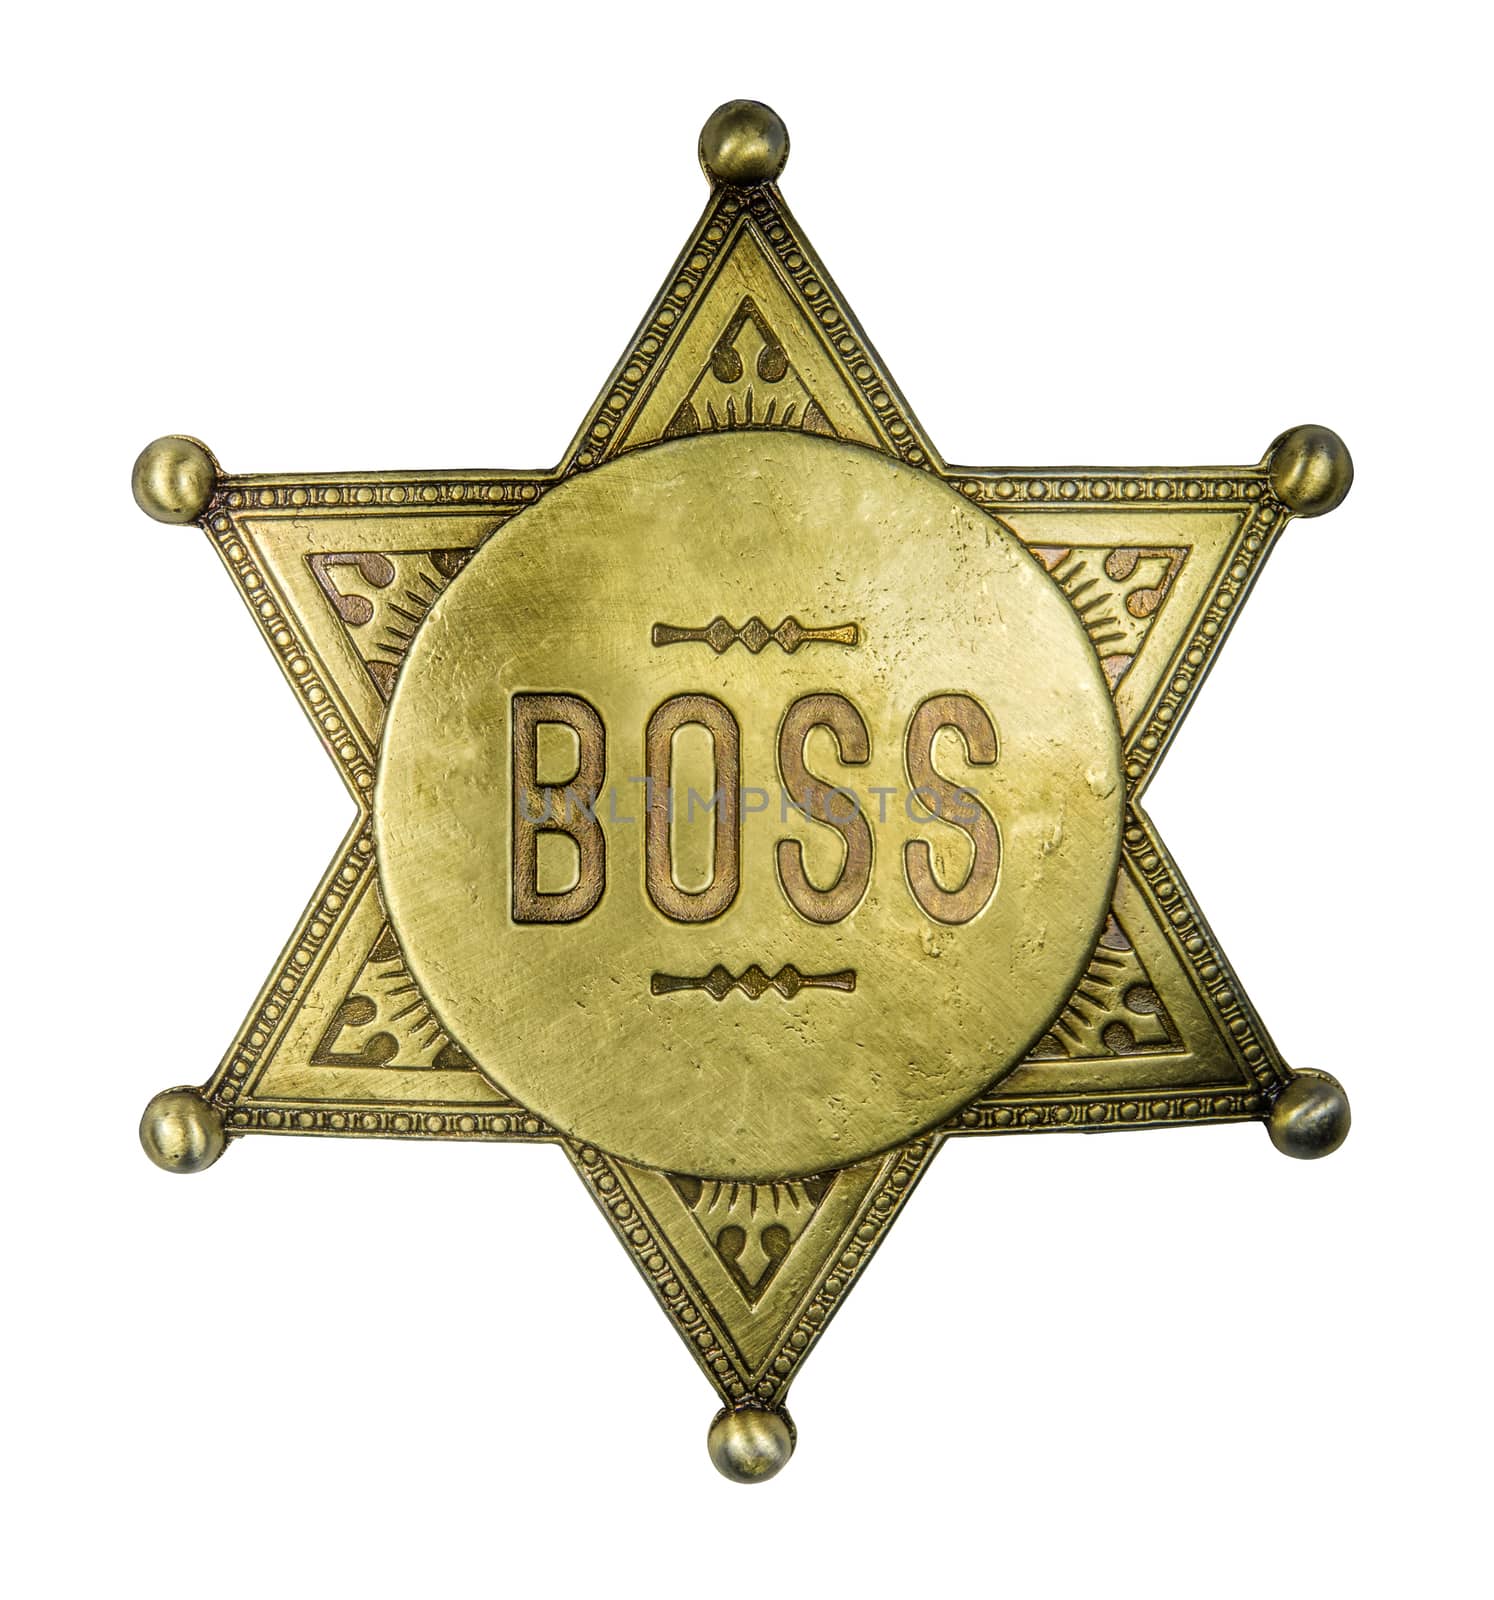 Isolated Brass Boss Badge In The Style Of A Vintage Sheriff's Star On A White Background